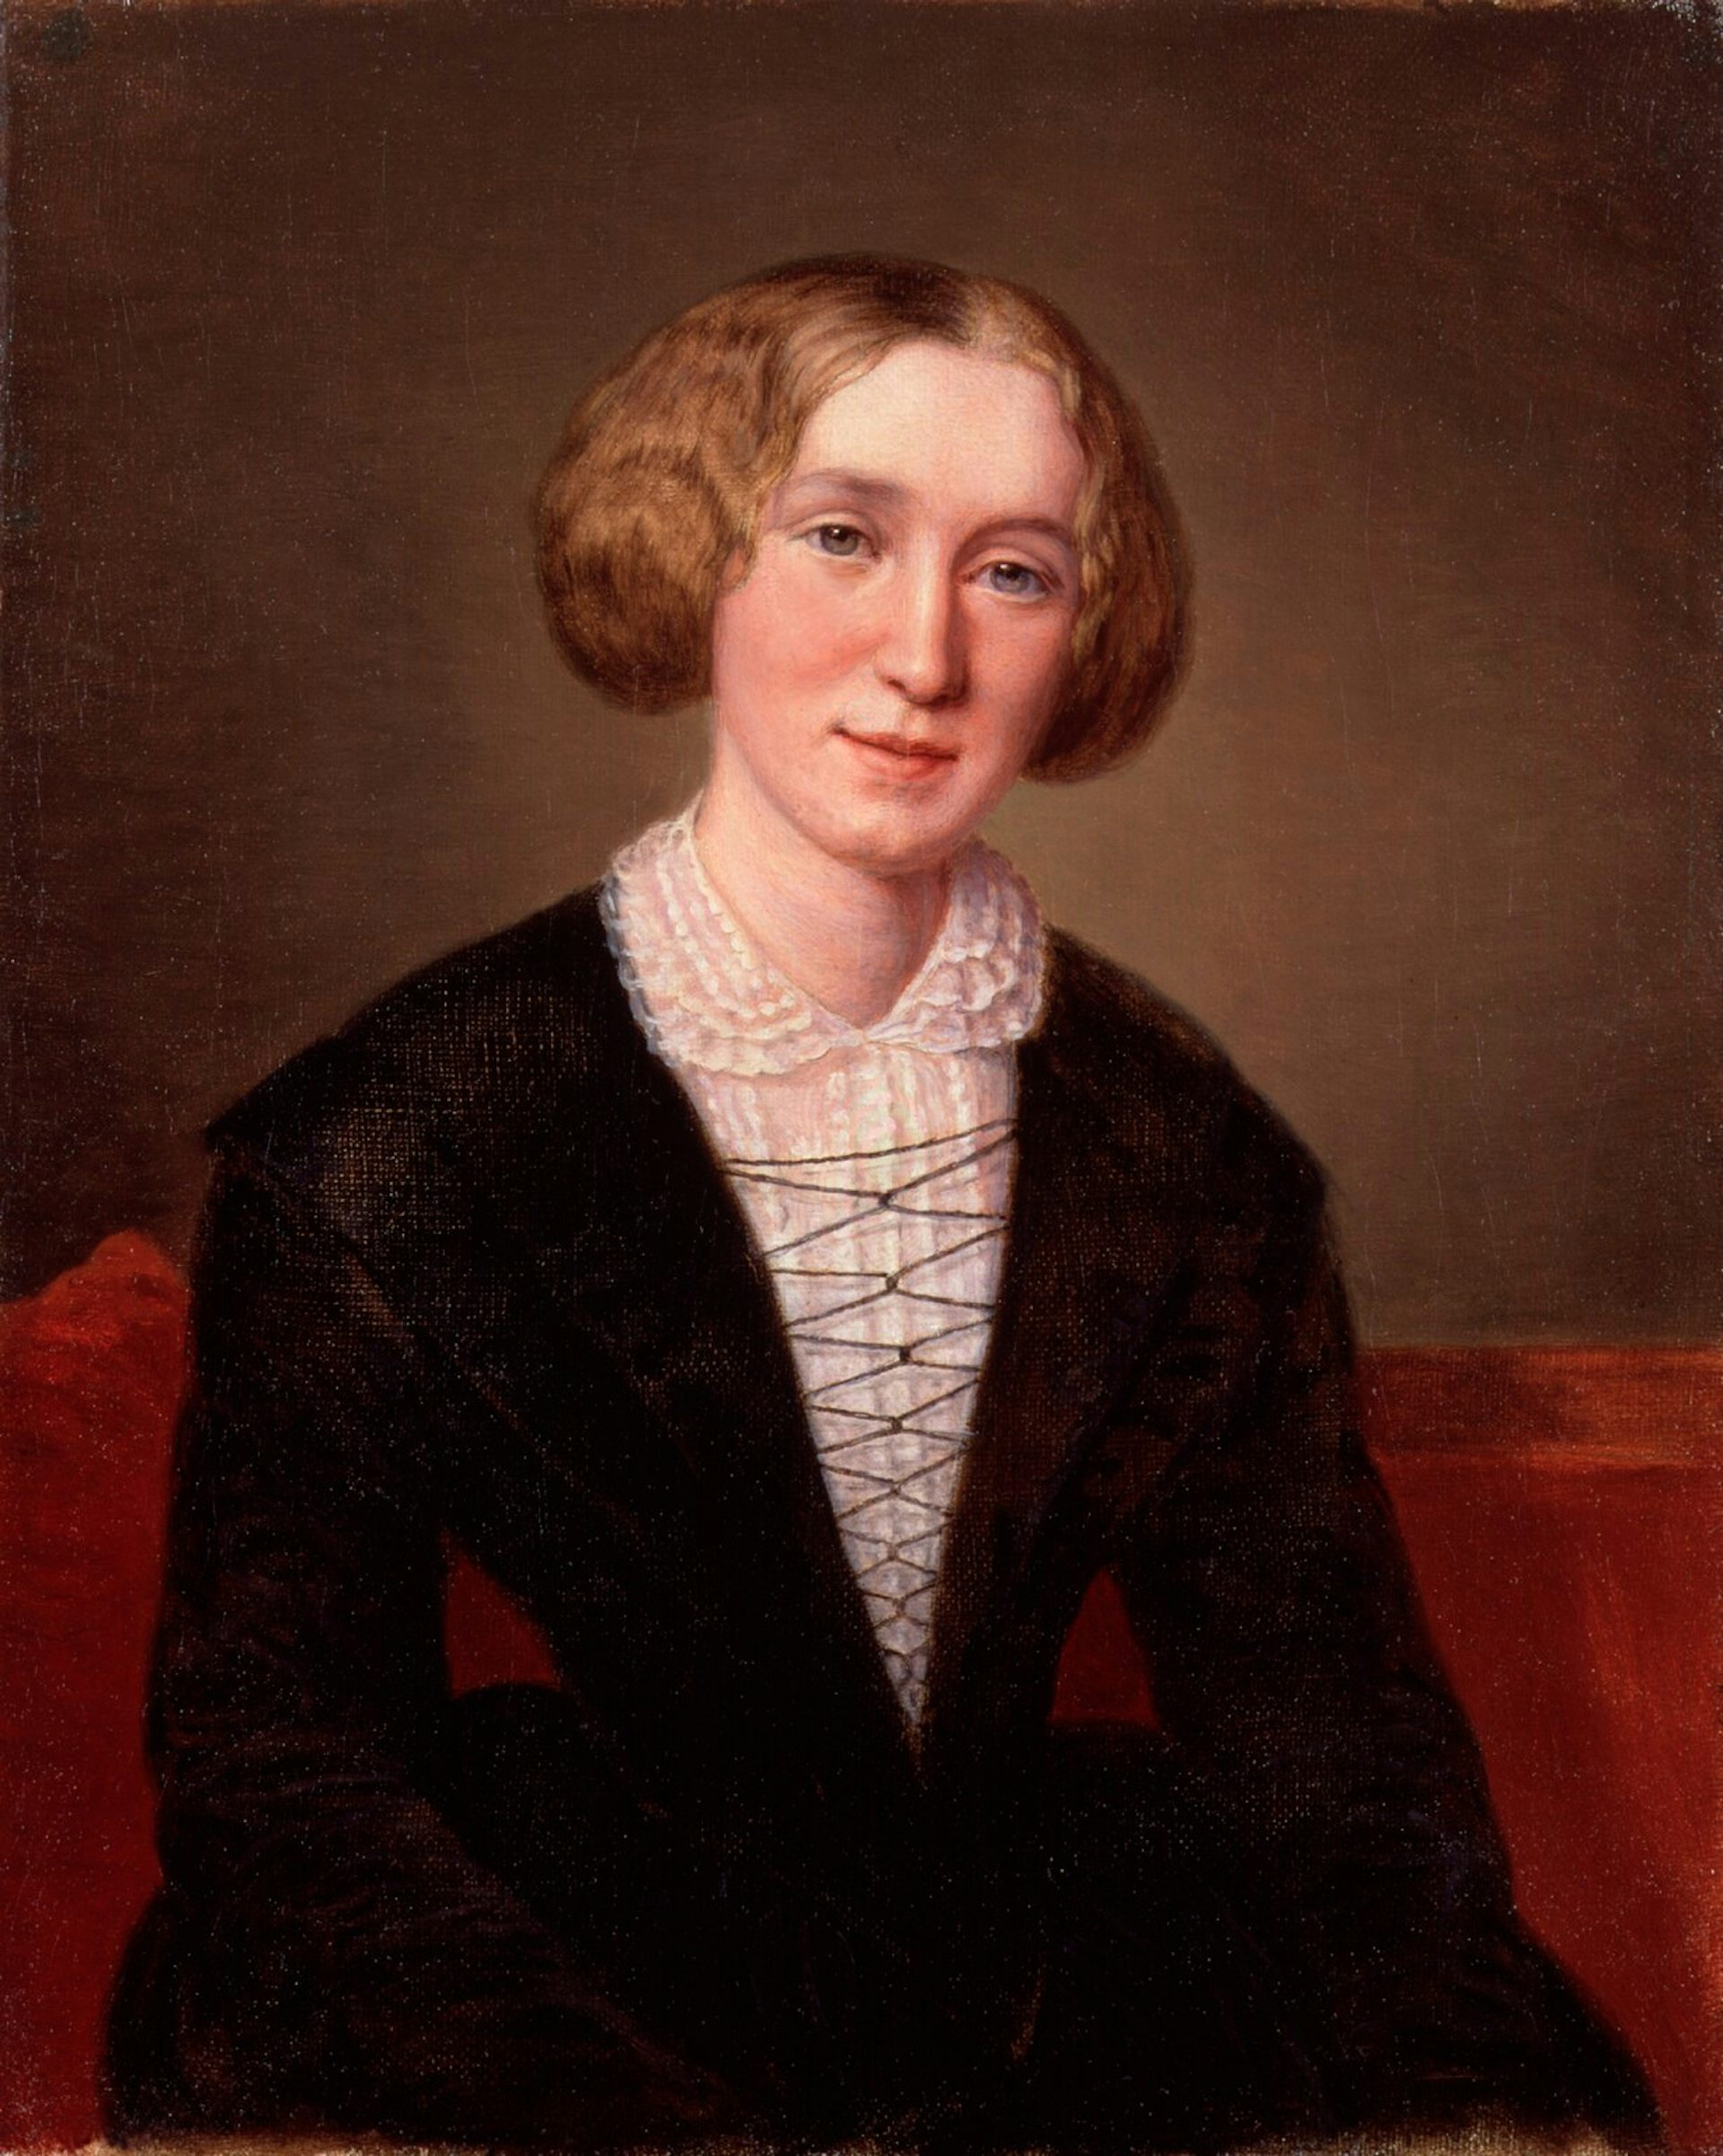 Friday essay: George Eliot 200 years on - a scandalous life, a 